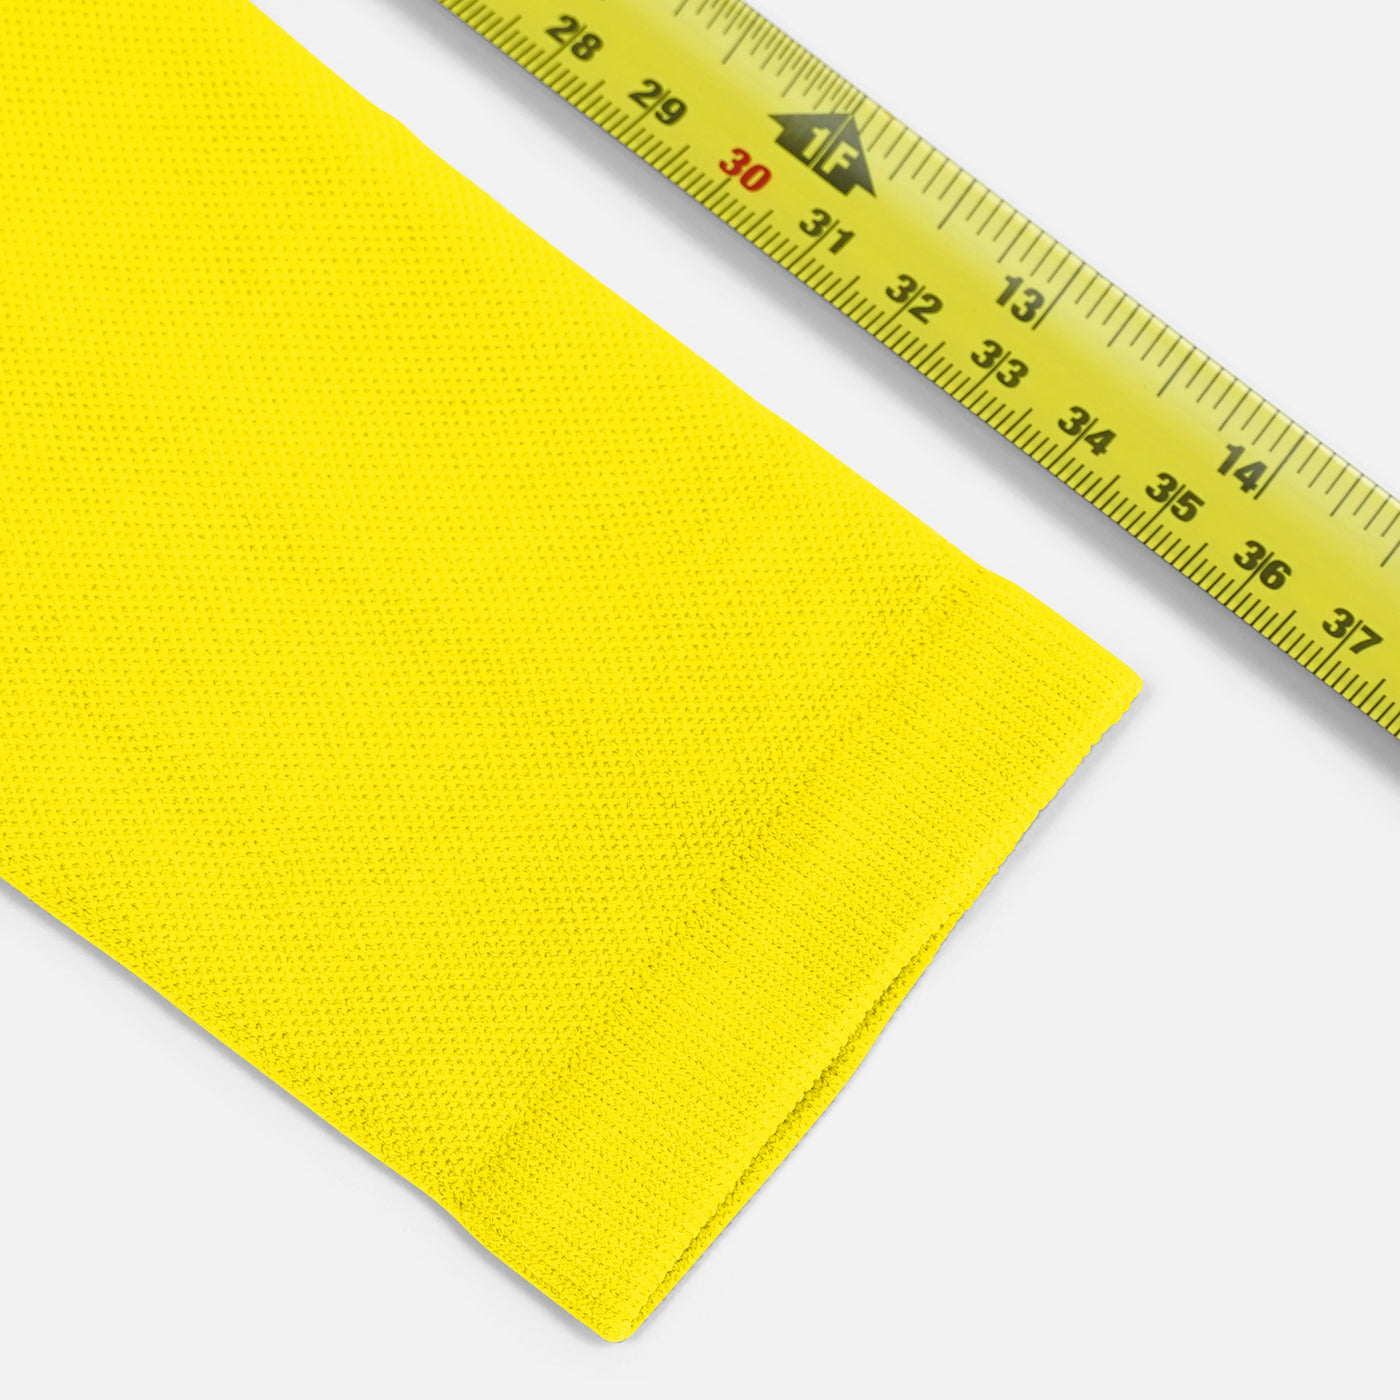 Hue Yellow One Size Fits All Baseball Arm Sleeve